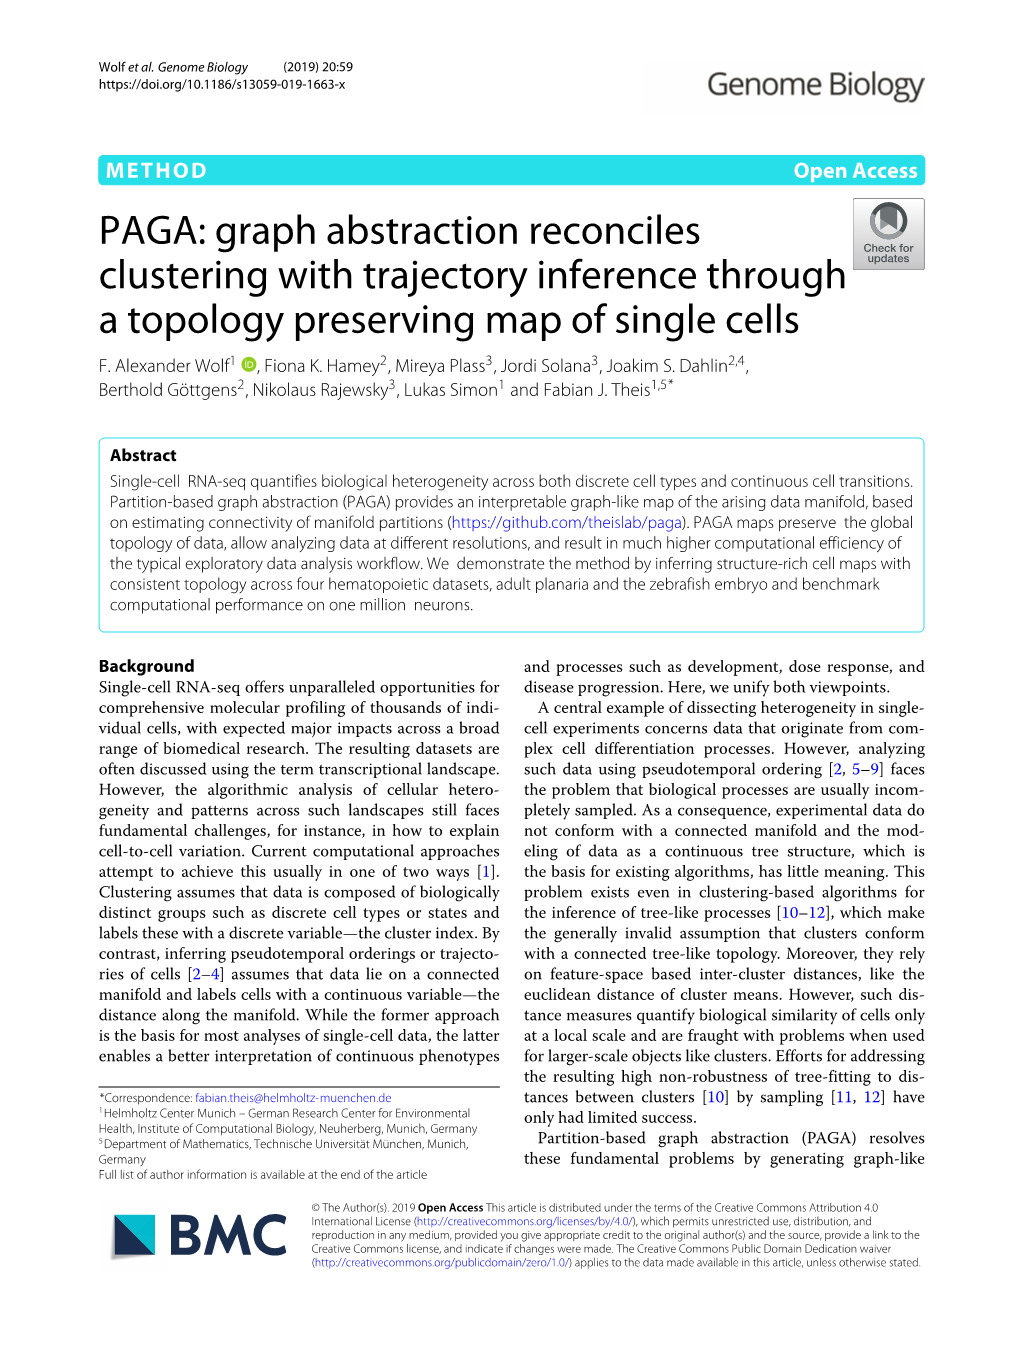 PAGA: Graph Abstraction Reconciles Clustering with Trajectory Inference Through a Topology Preserving Map of Single Cells F